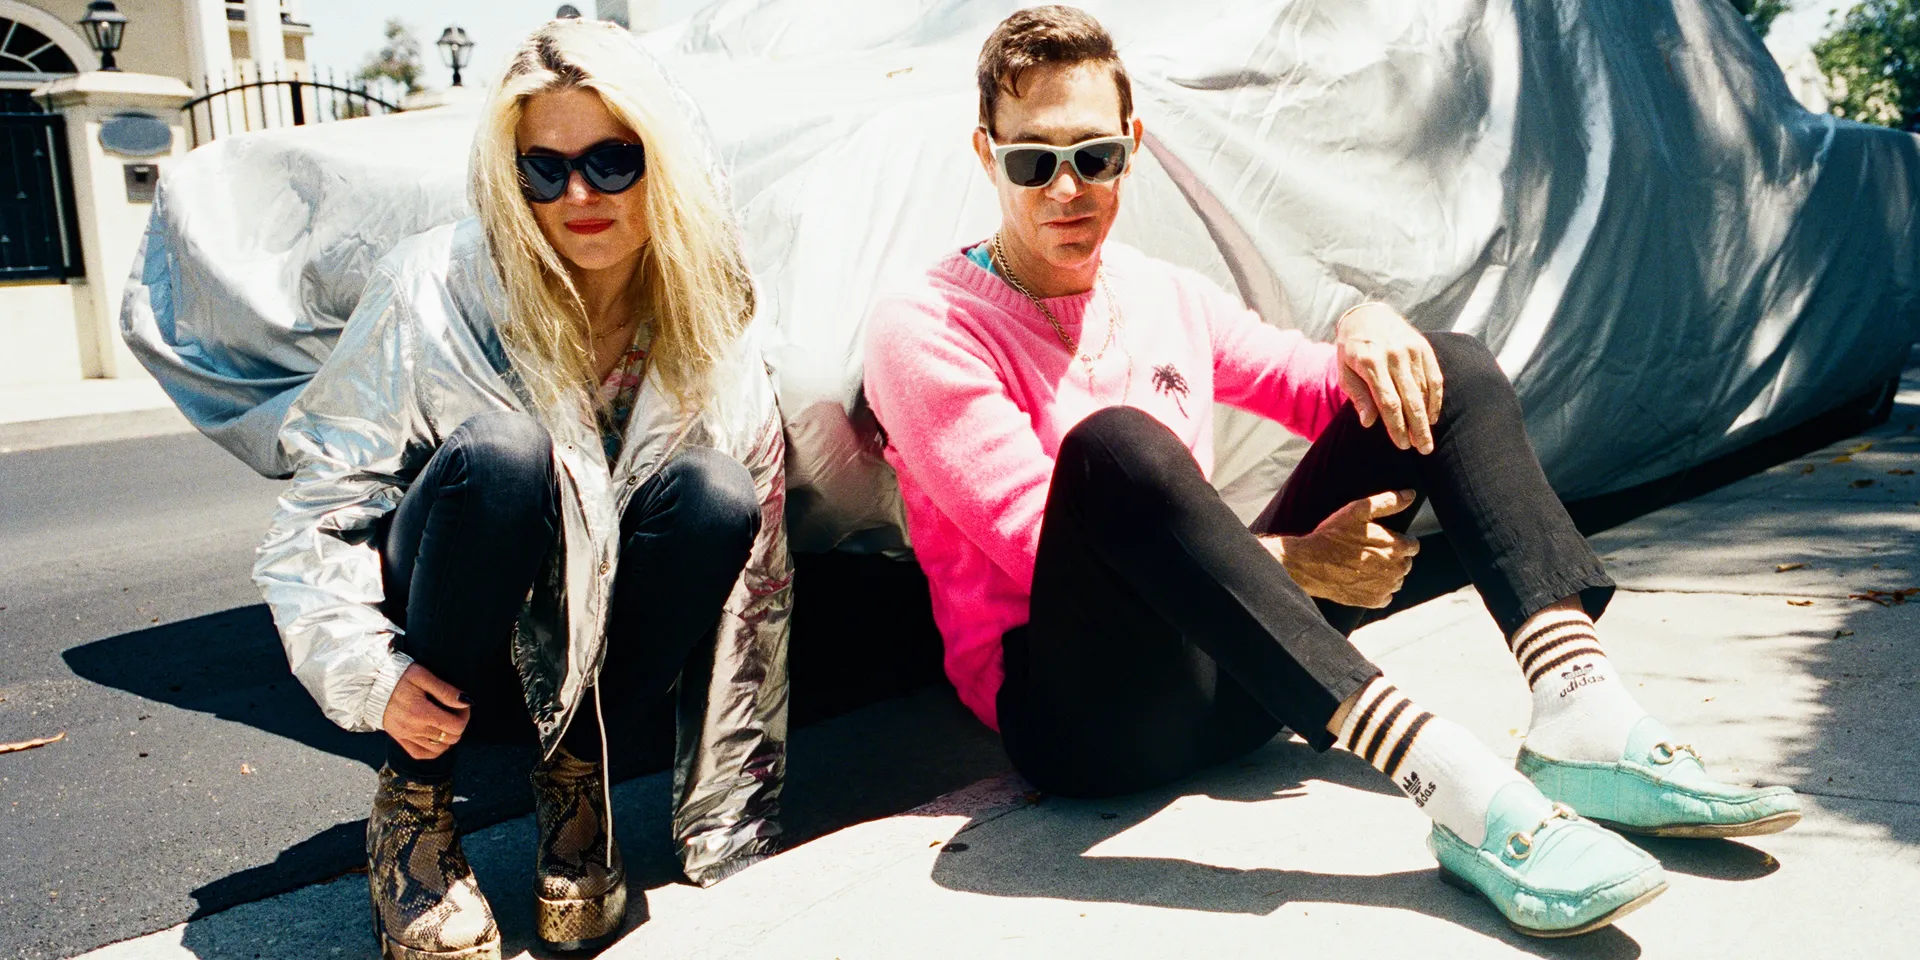 The Kills Announce New Album God Games, Share Video for New Song “103”: Watch